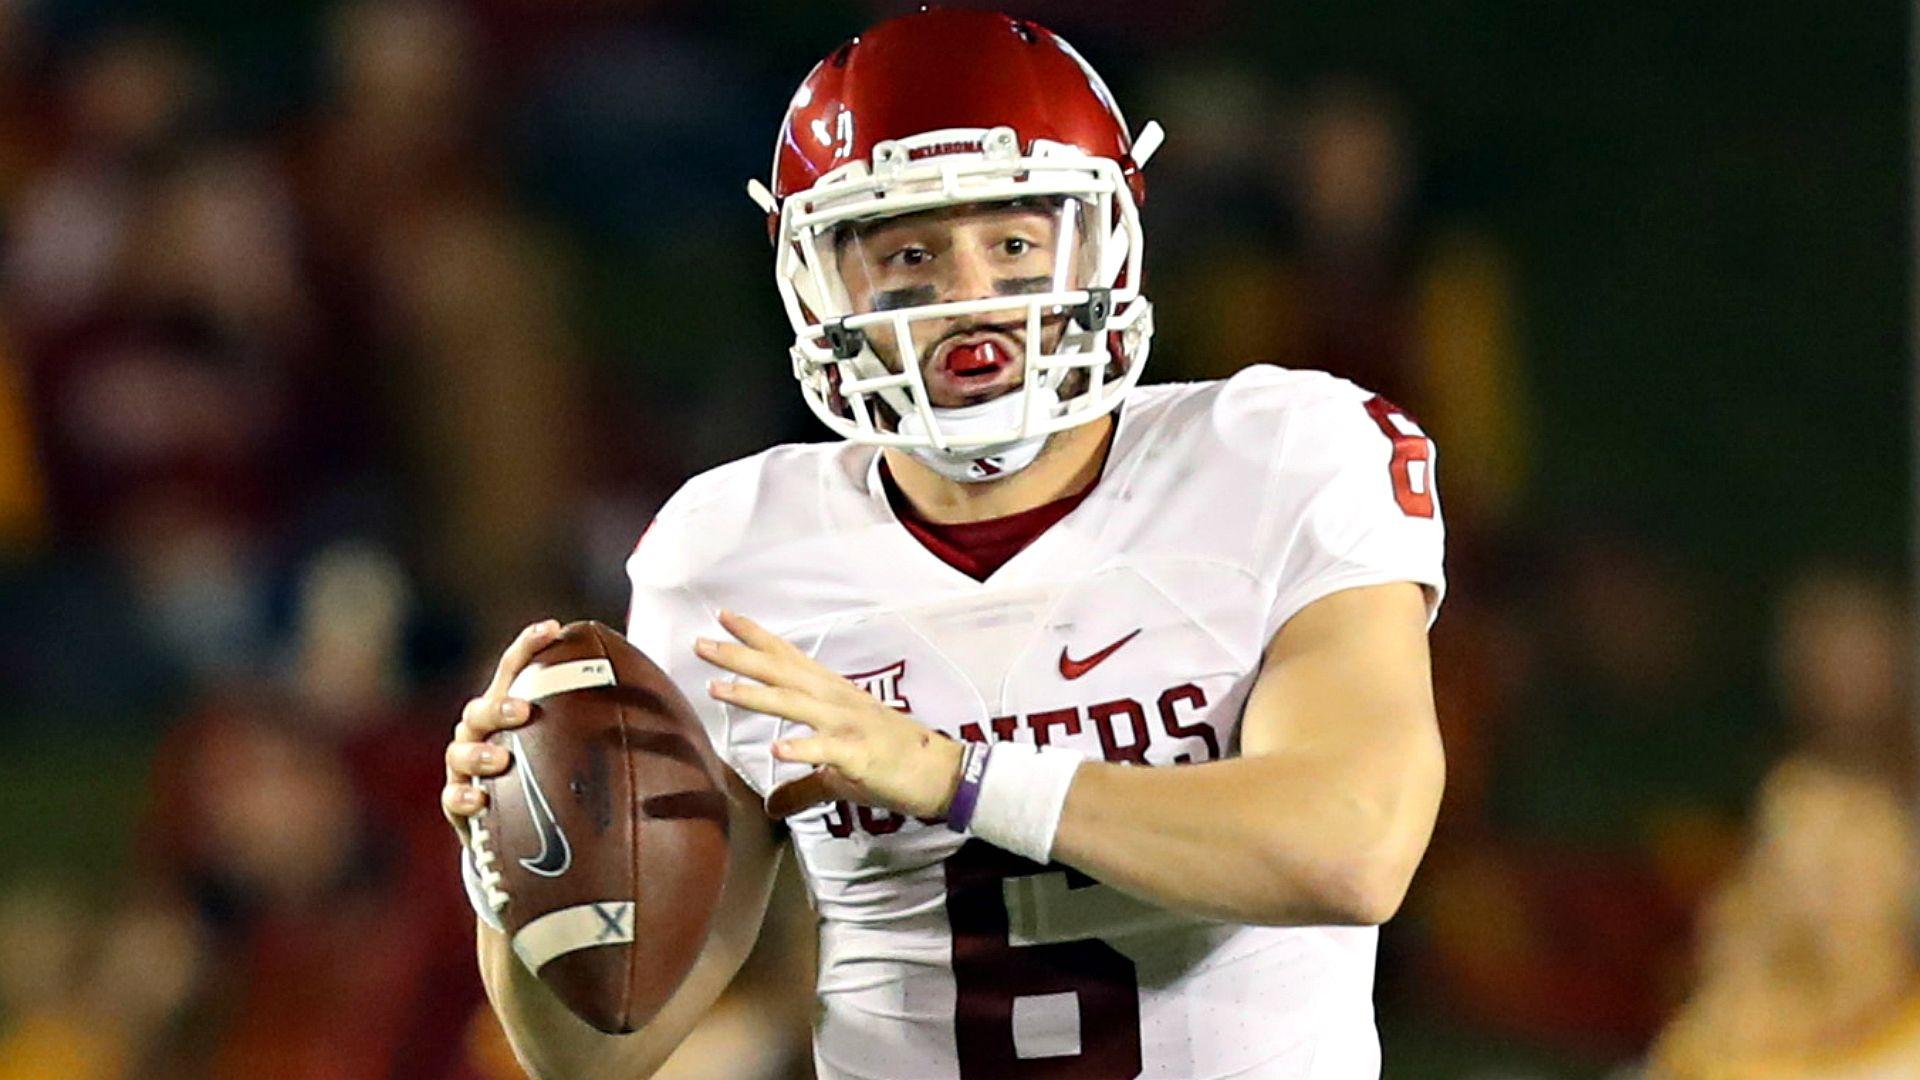 Oklahoma QB Baker Mayfield Issues Apology After Arrest